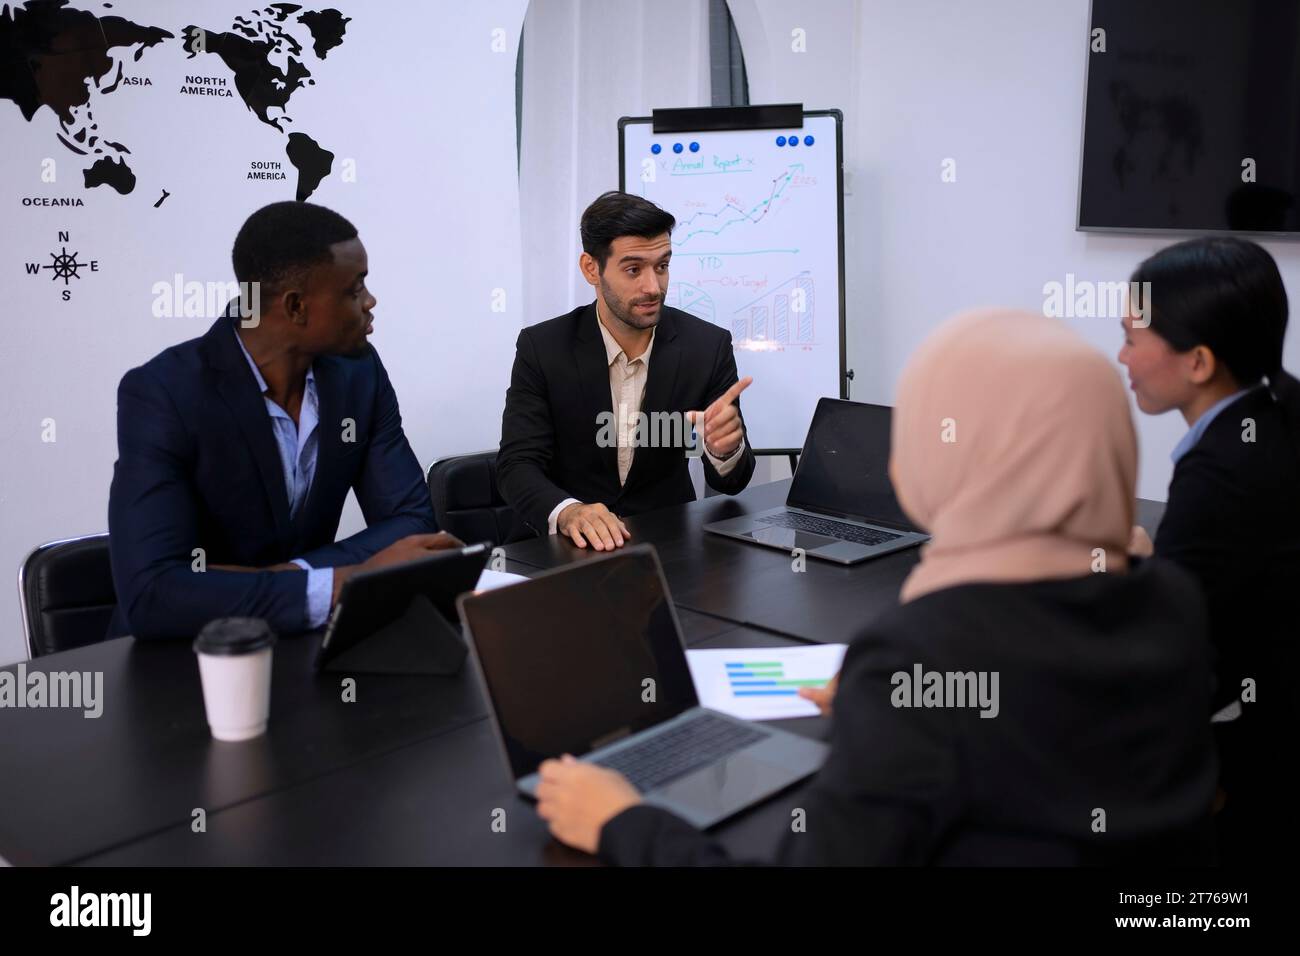 White collar workers are meeting at office. Business and occupation concept. Stock Photo